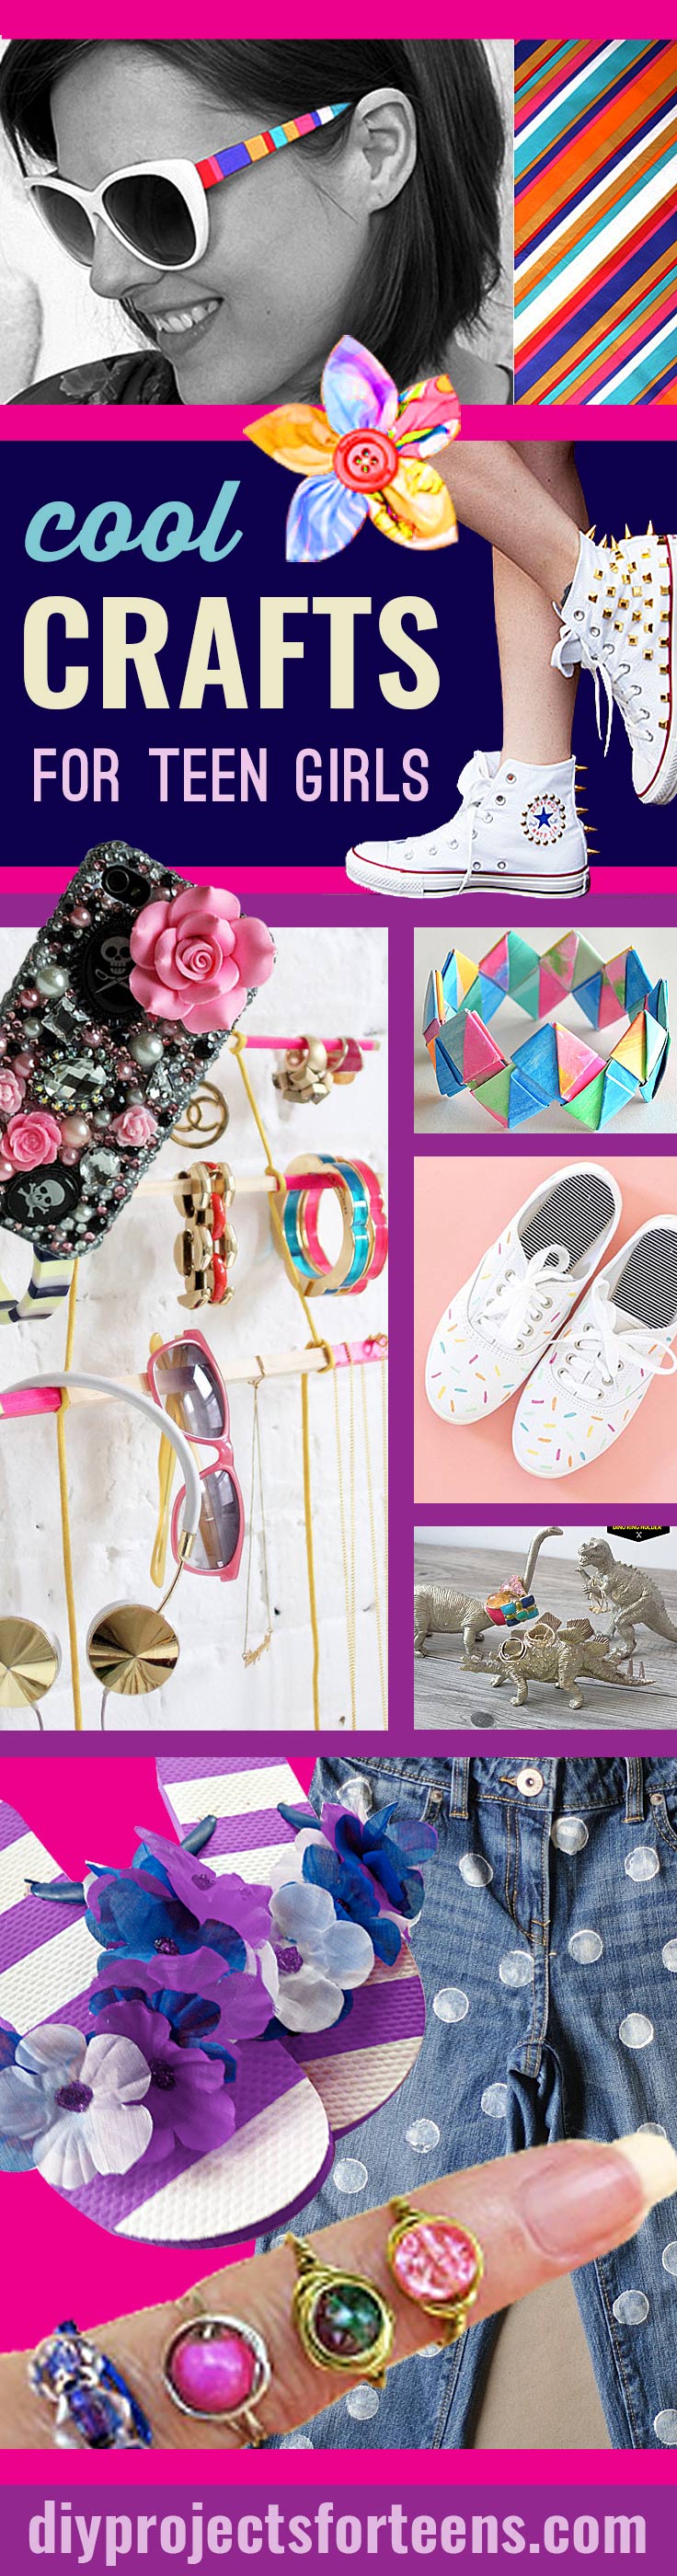 Cool Crafts For Teen Girls - Fun and Easy DIY Projects for the Creative Teen, Tween and Teenager. Girls love these crafty ideas for decor, gifts, fashion, jewelry and room decor.